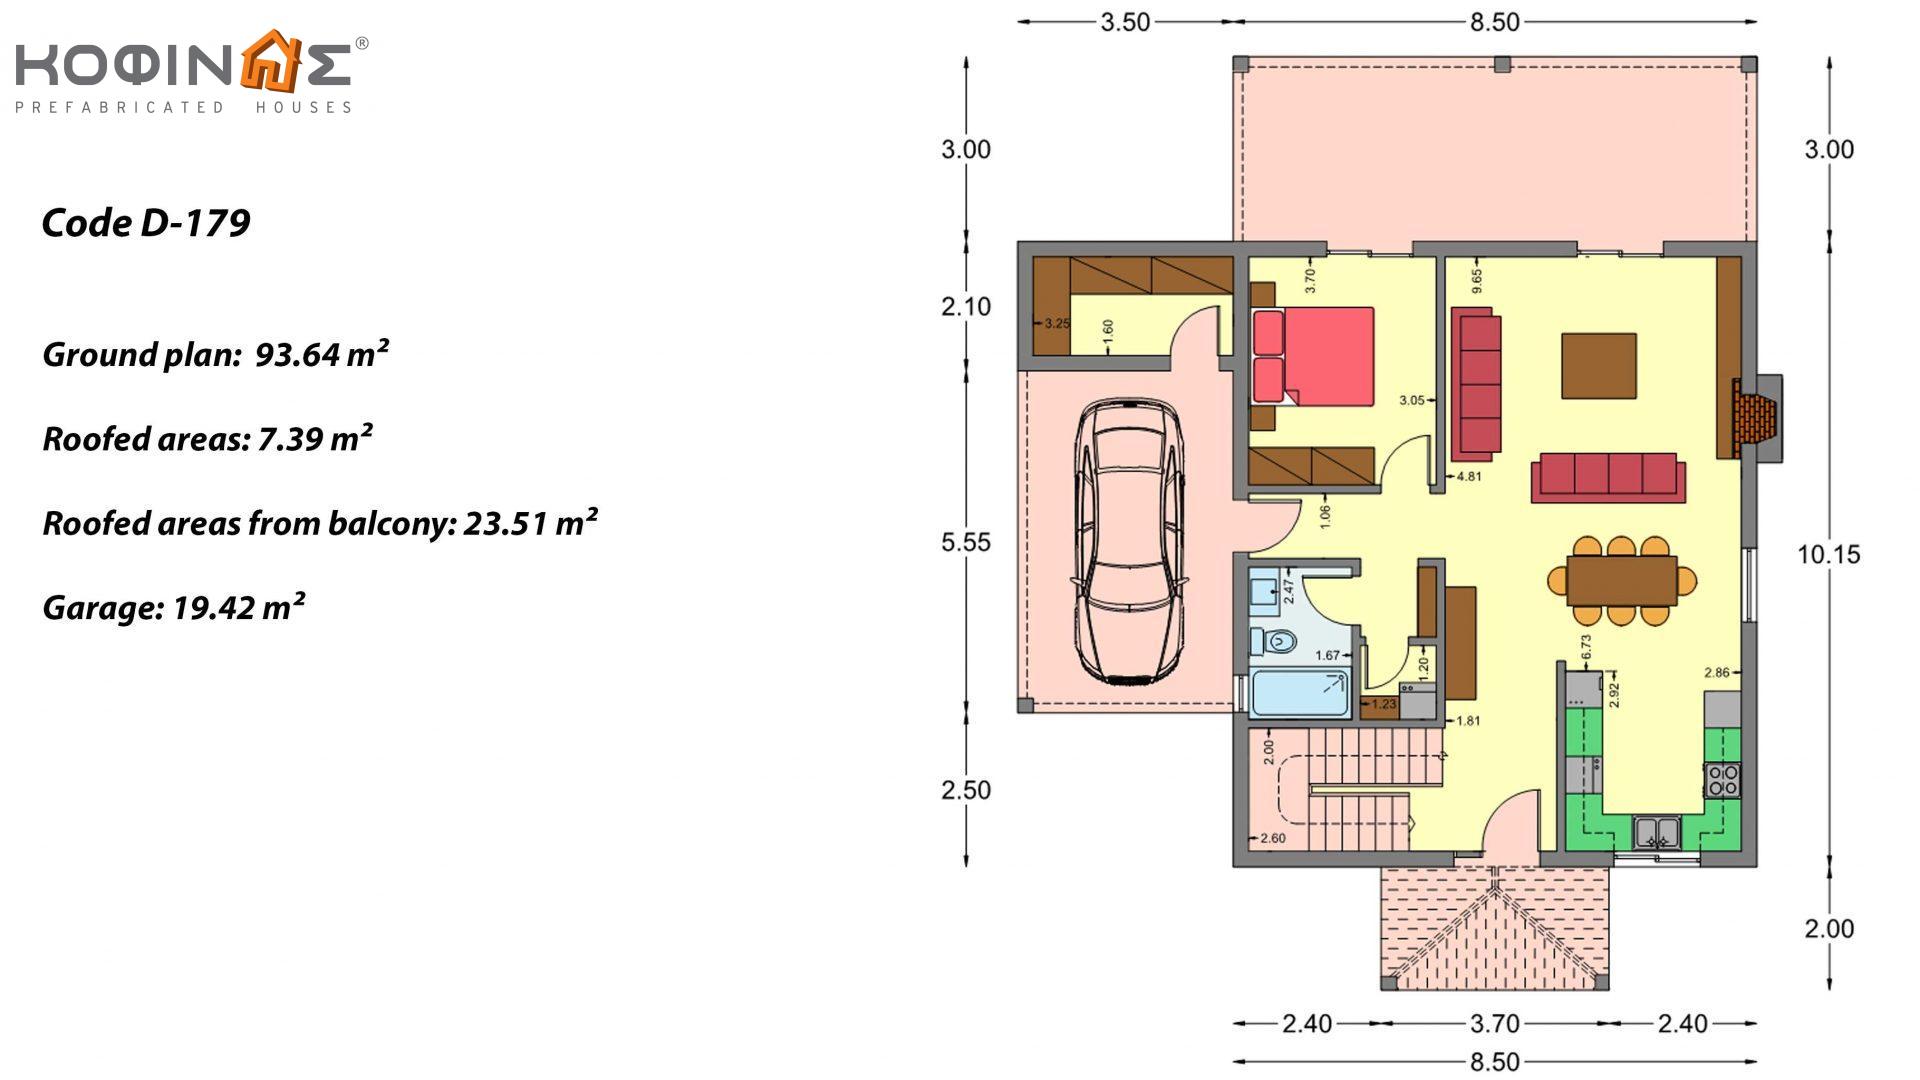 2-story house D-179, total surface of 179.38 m², +Garage 19.42 τ.μ. (=198.80 m²), covered roofed areas 30.90 m², Balconies 23.51 m²